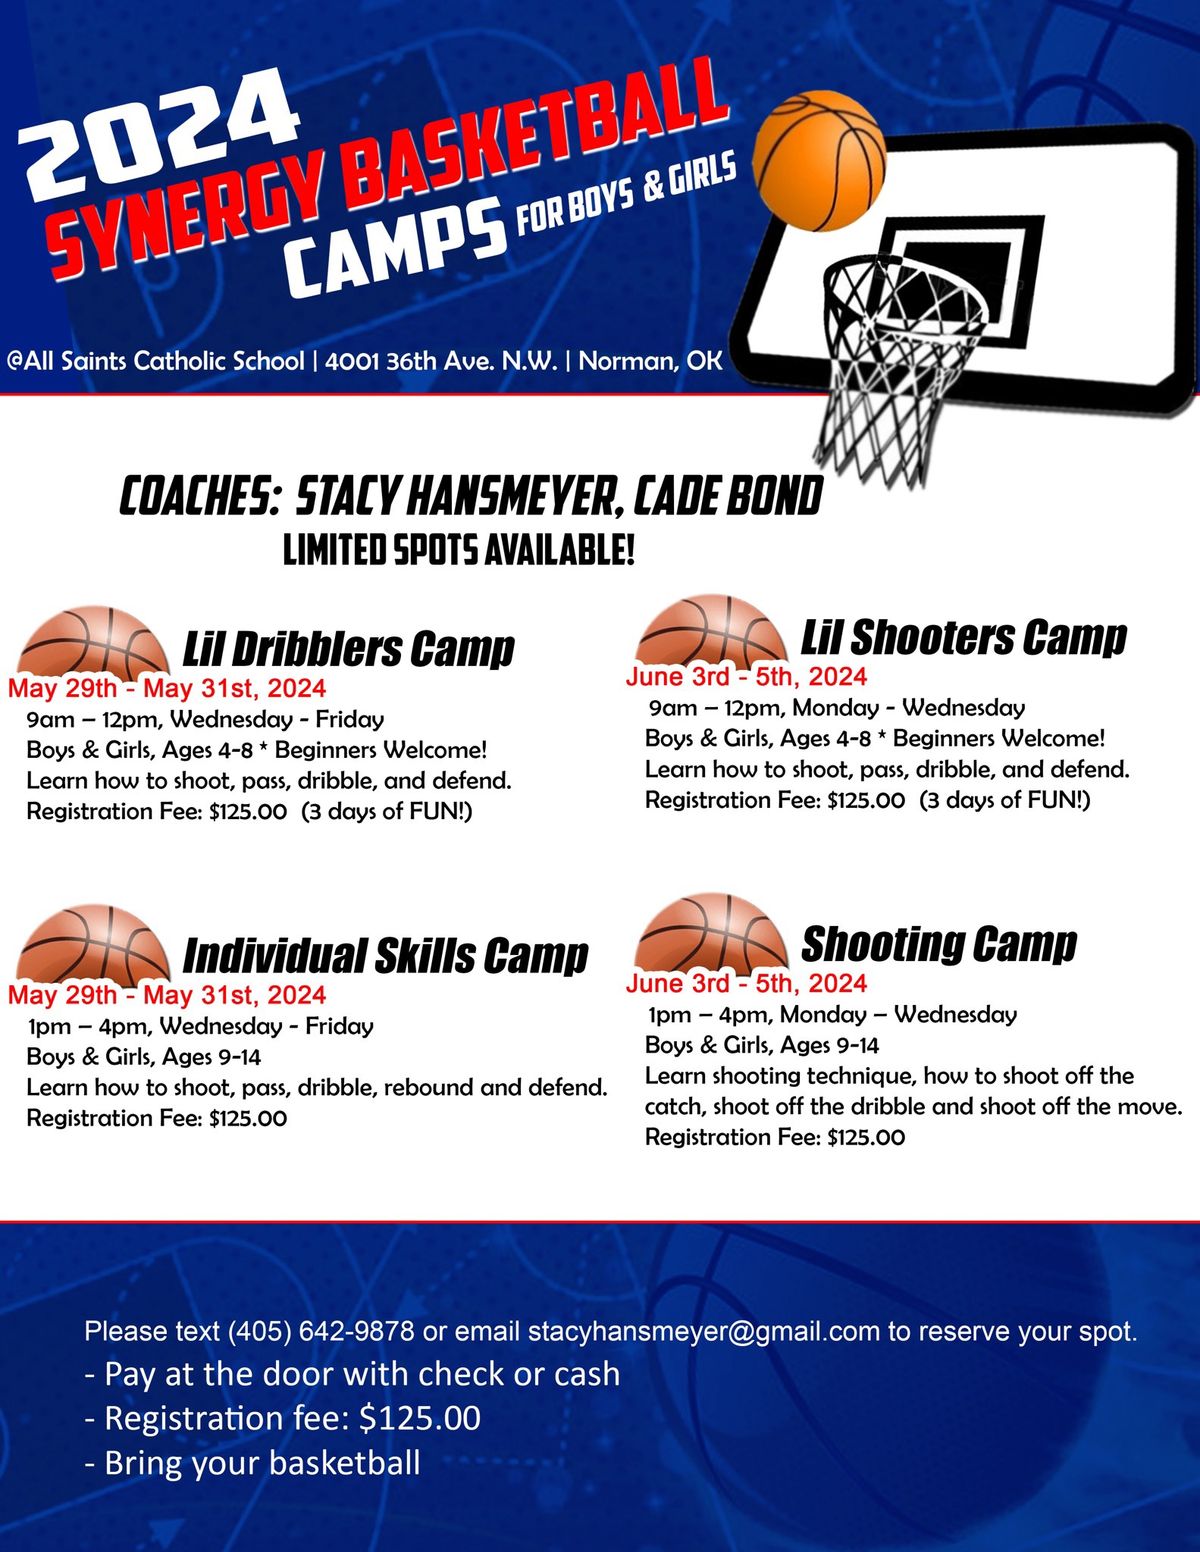 Synergy Basketball Camps in Norman, OK 